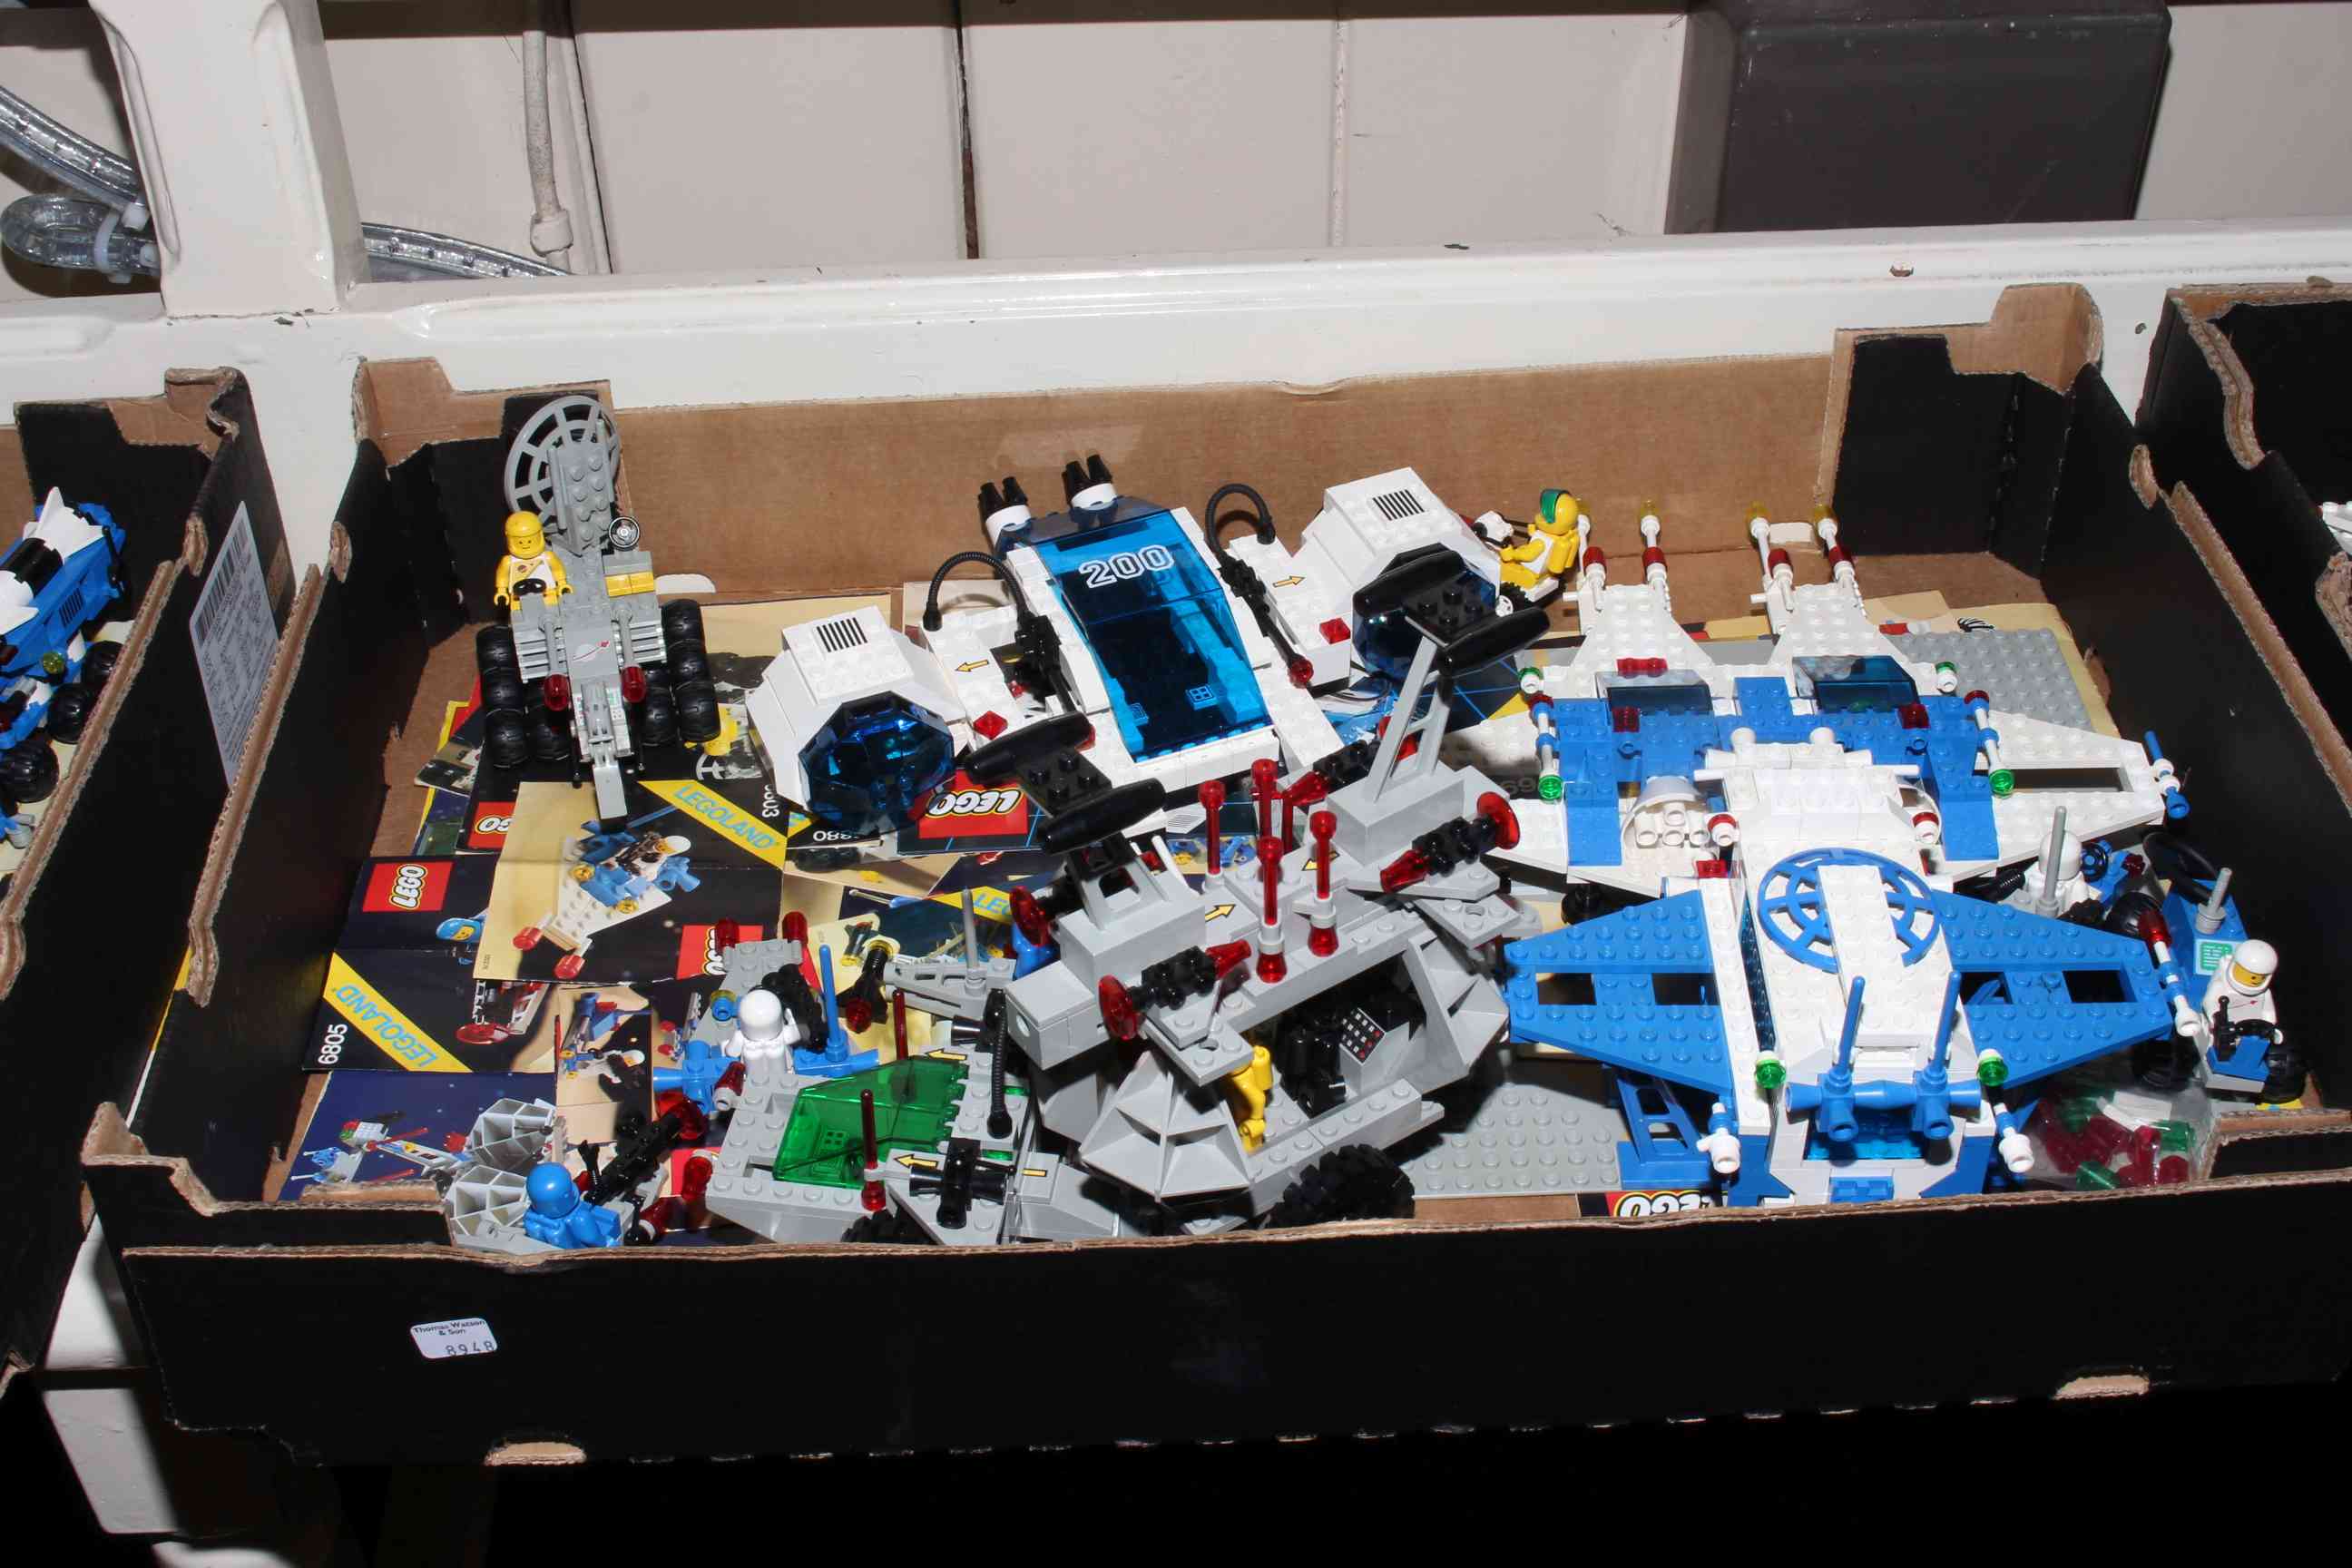 Collection of Lego models, numbers 6980, 6932, 6952, 6824, 6803, 6805, 6880.